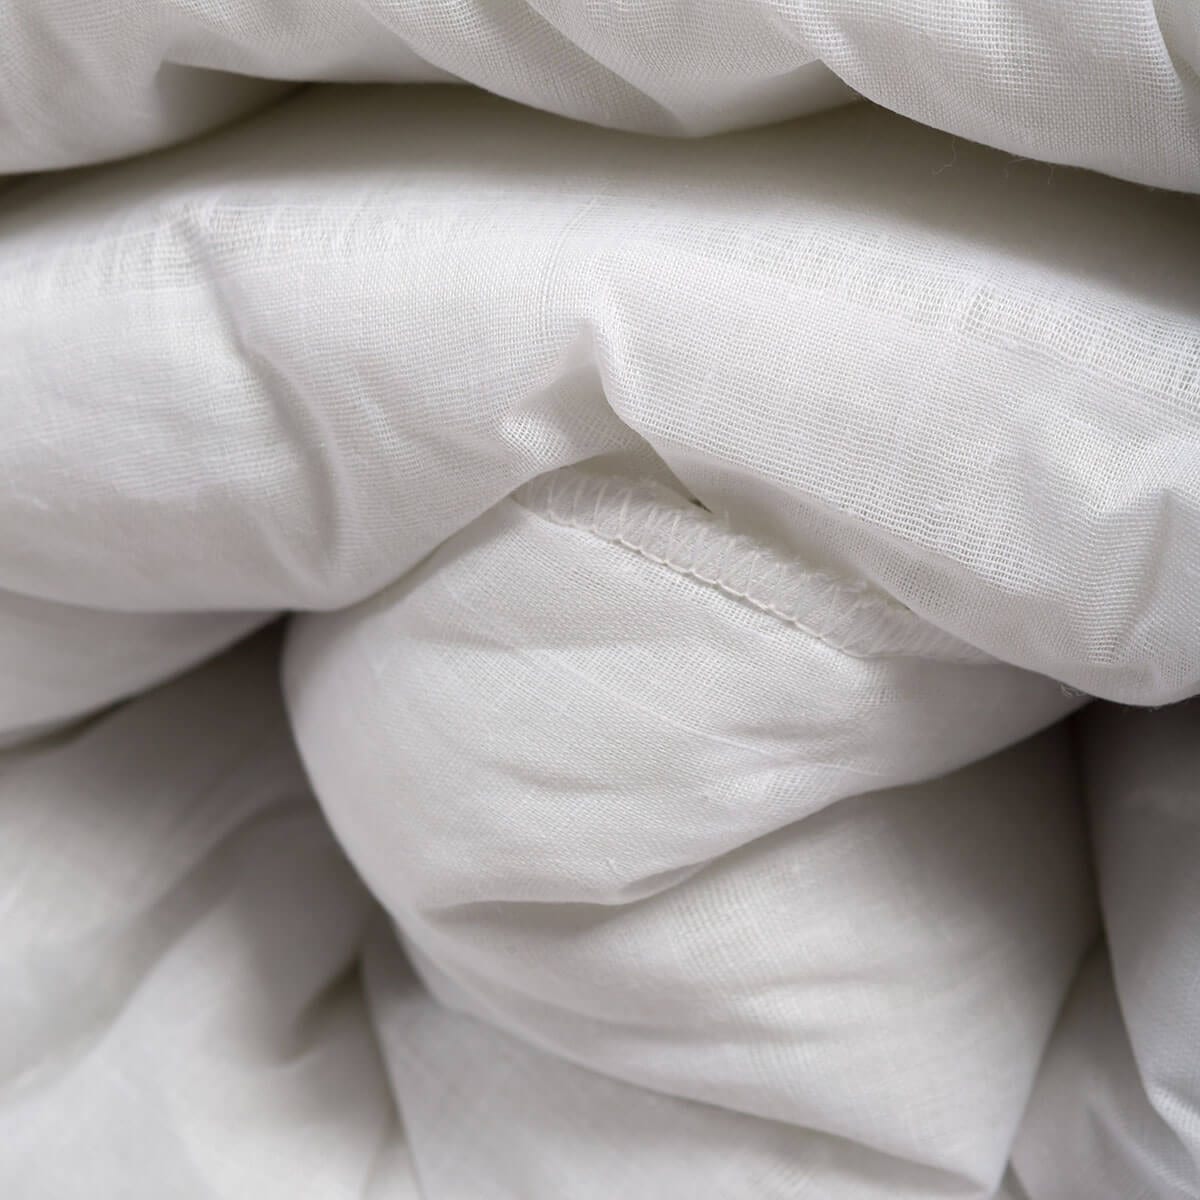 Wipe clean single bed duvets for healthcare use